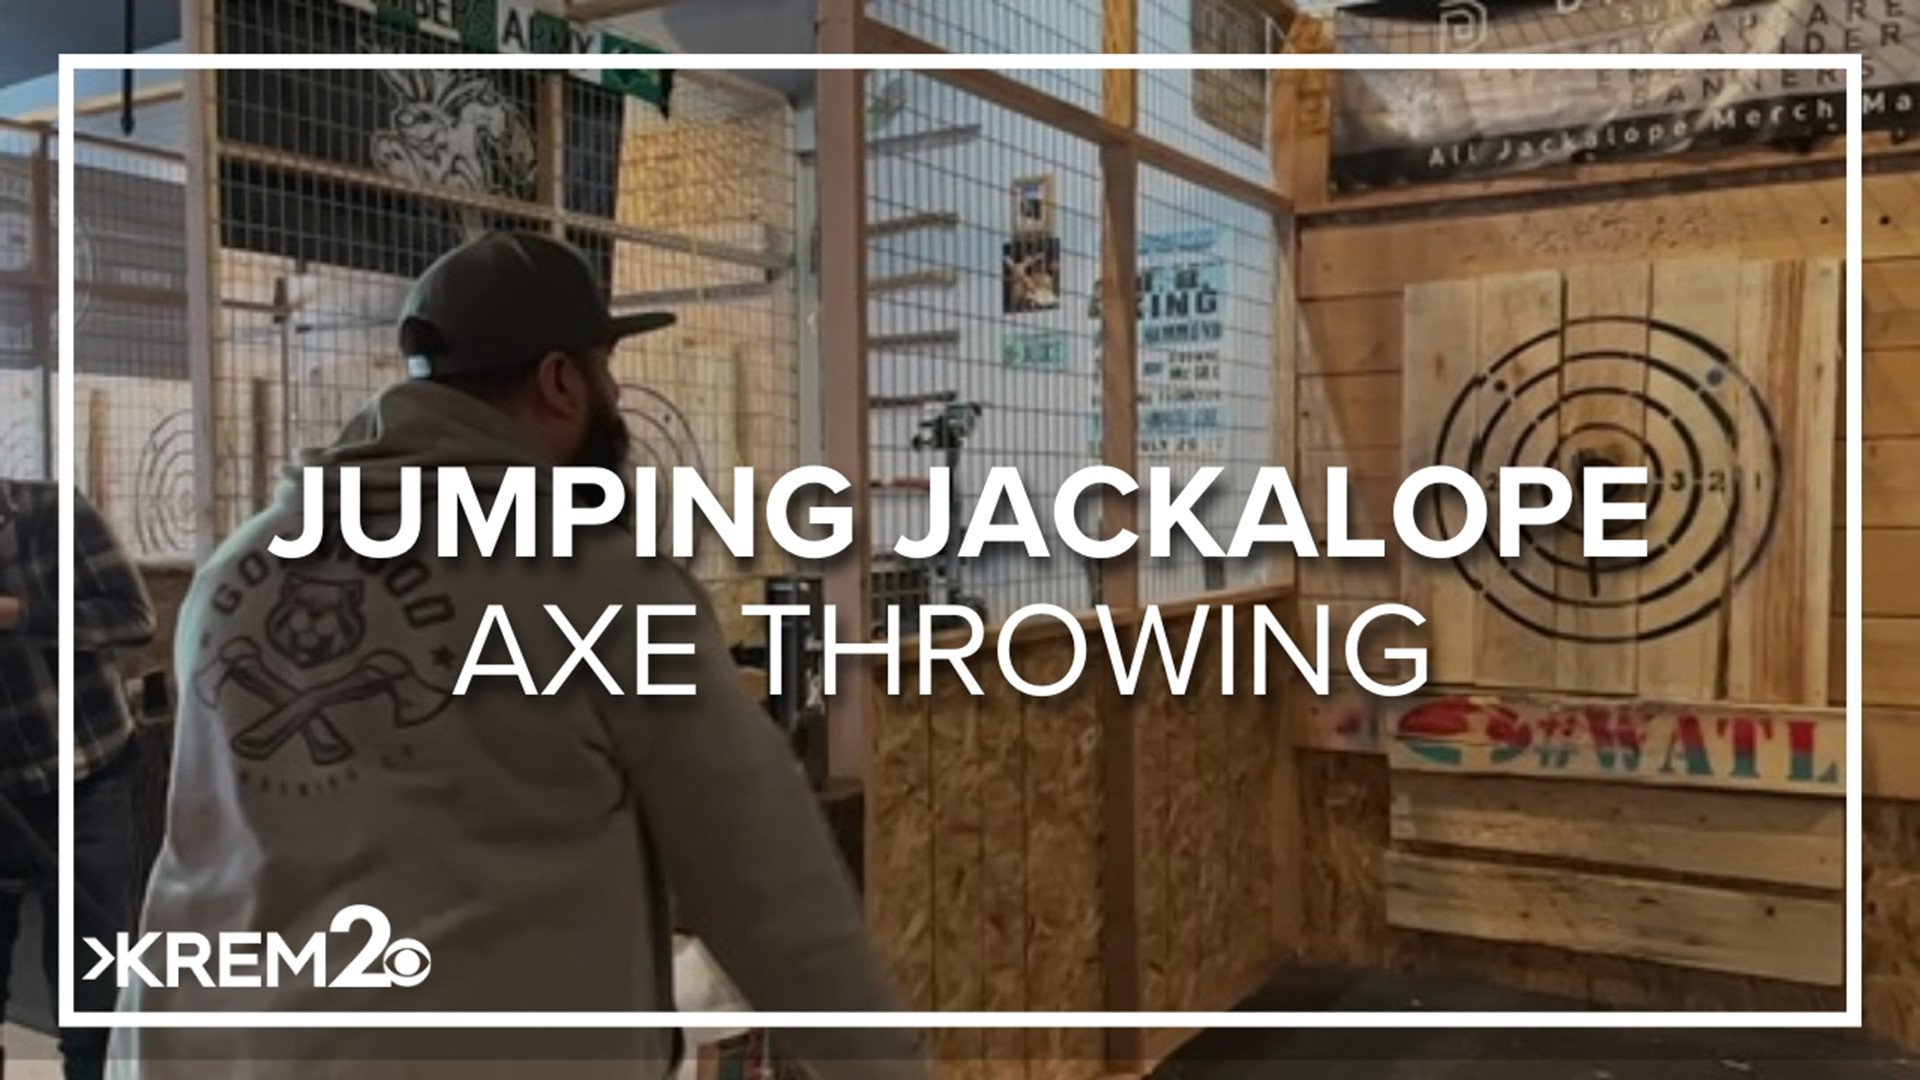 Miguel Tamburini's passion for axe-throwing ultimately defined his business and career, even if the odds were against him.